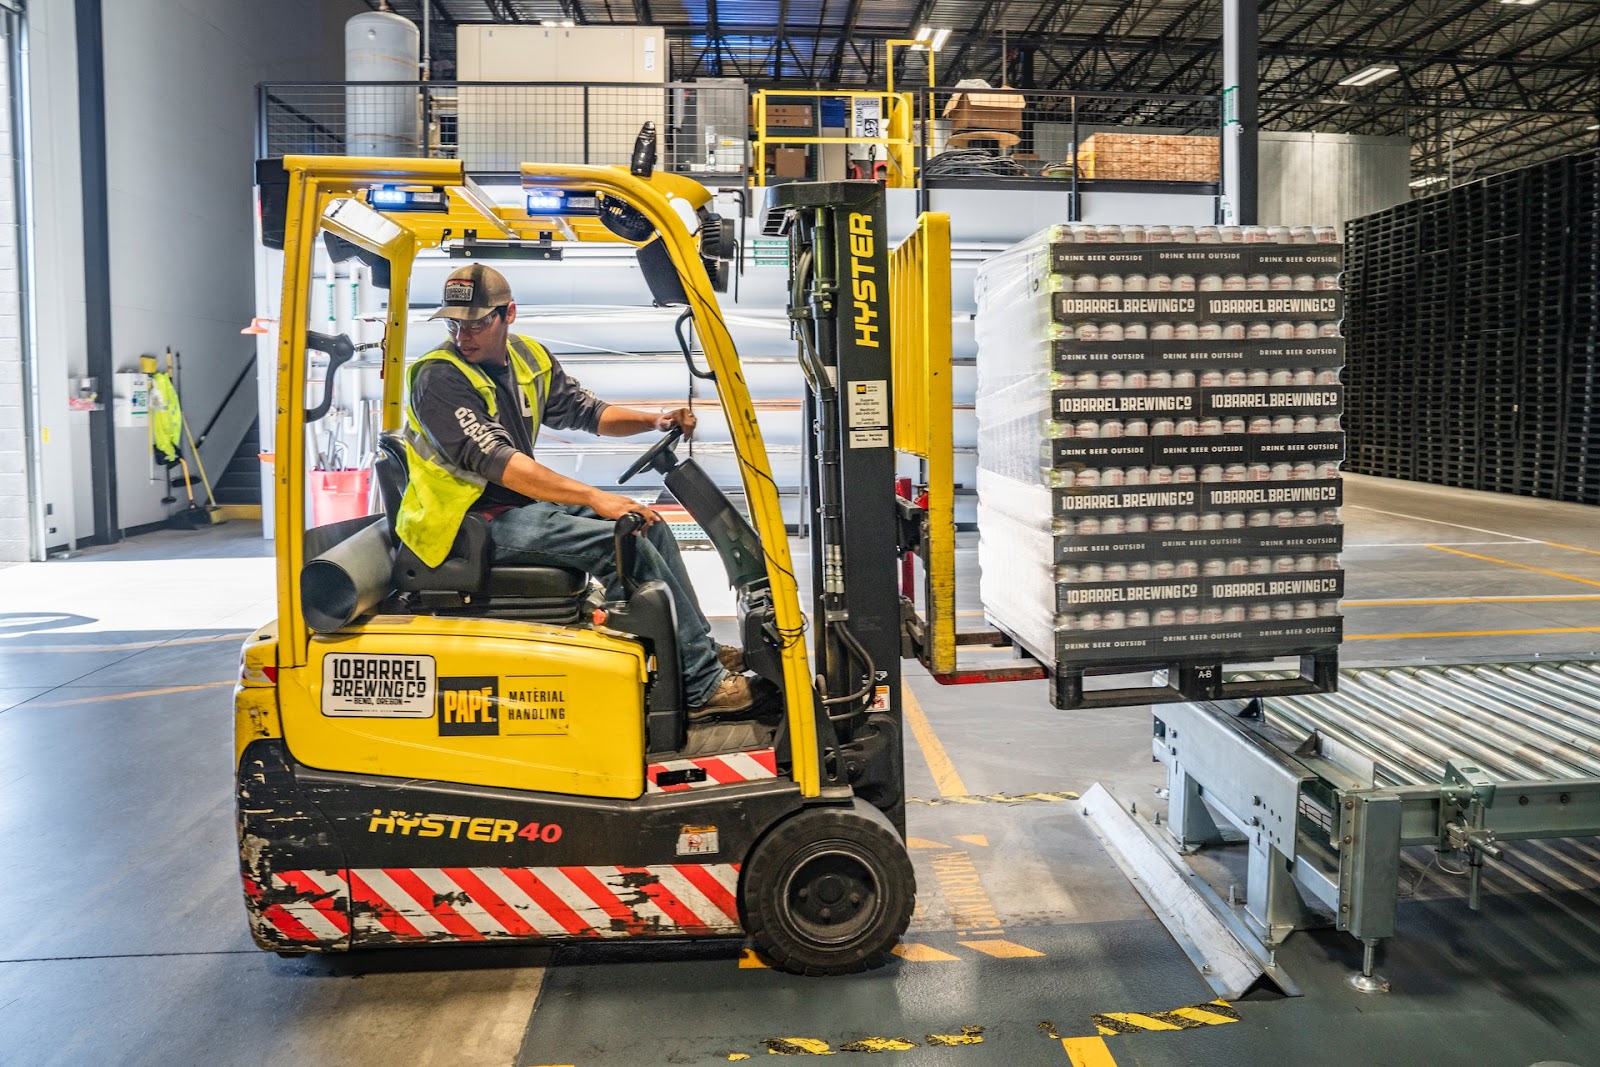 A worker uses a forklift to move pallets of cans.